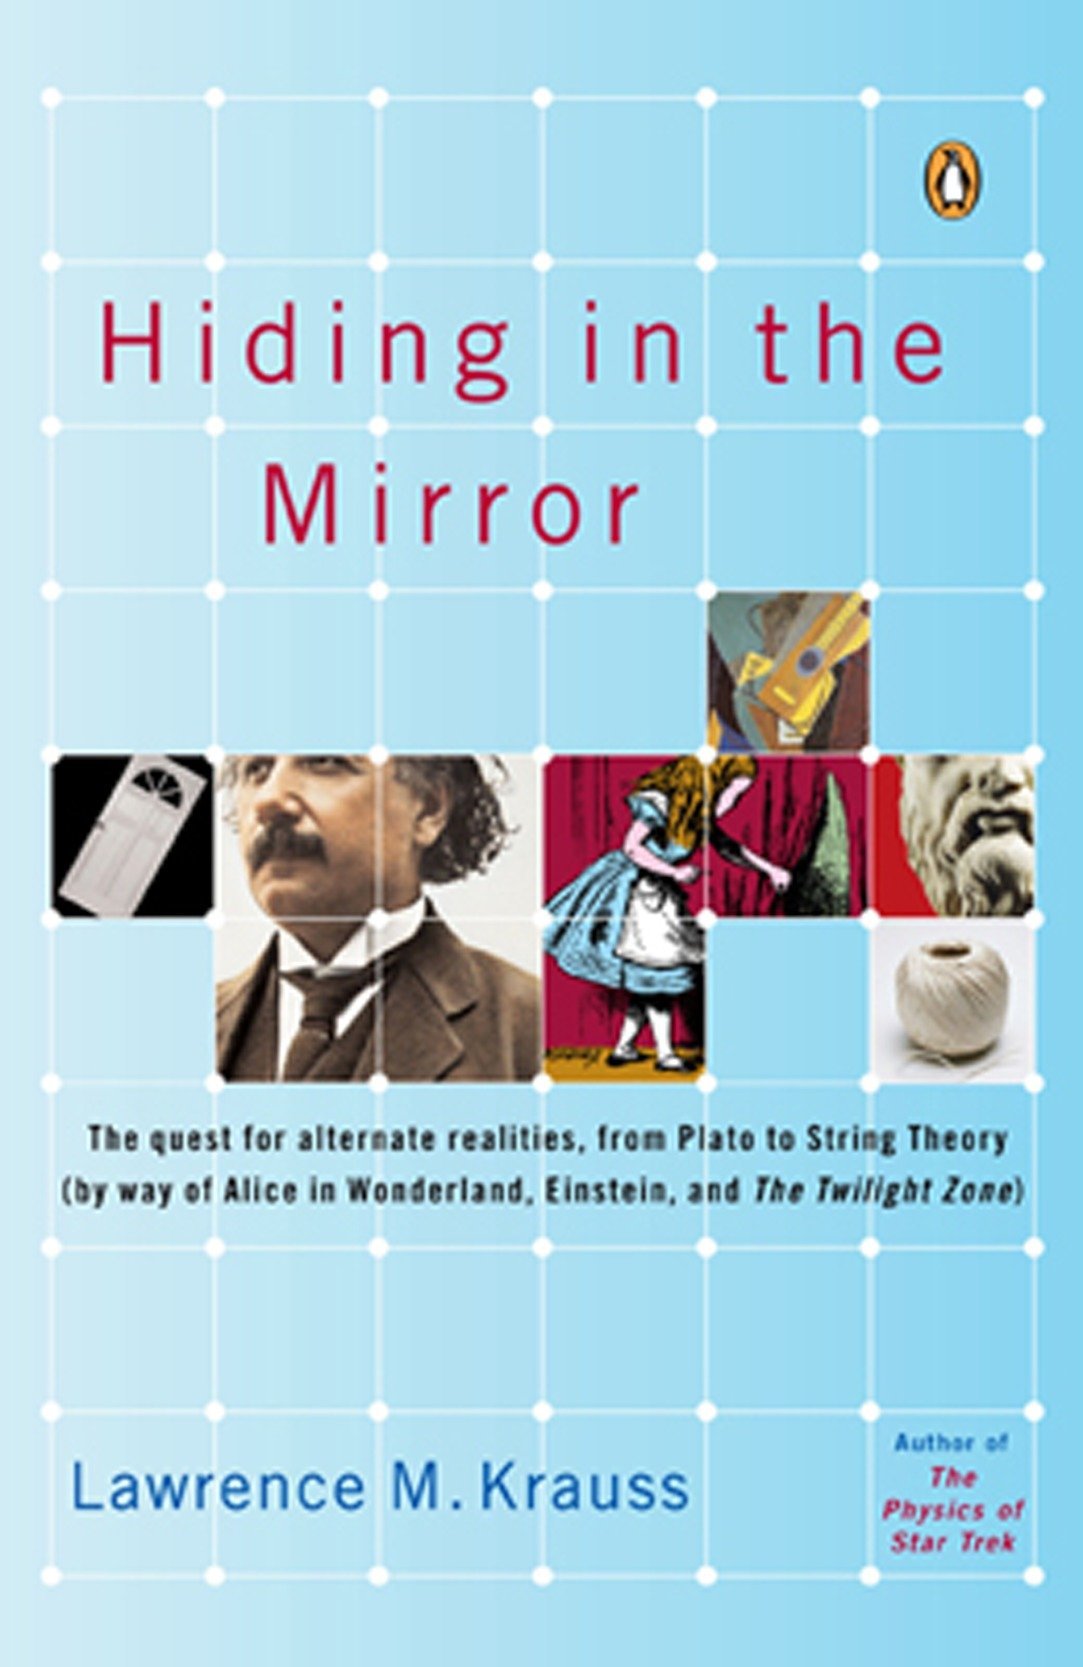 Hiding in the Mirror, by Lawrence M. Krauss